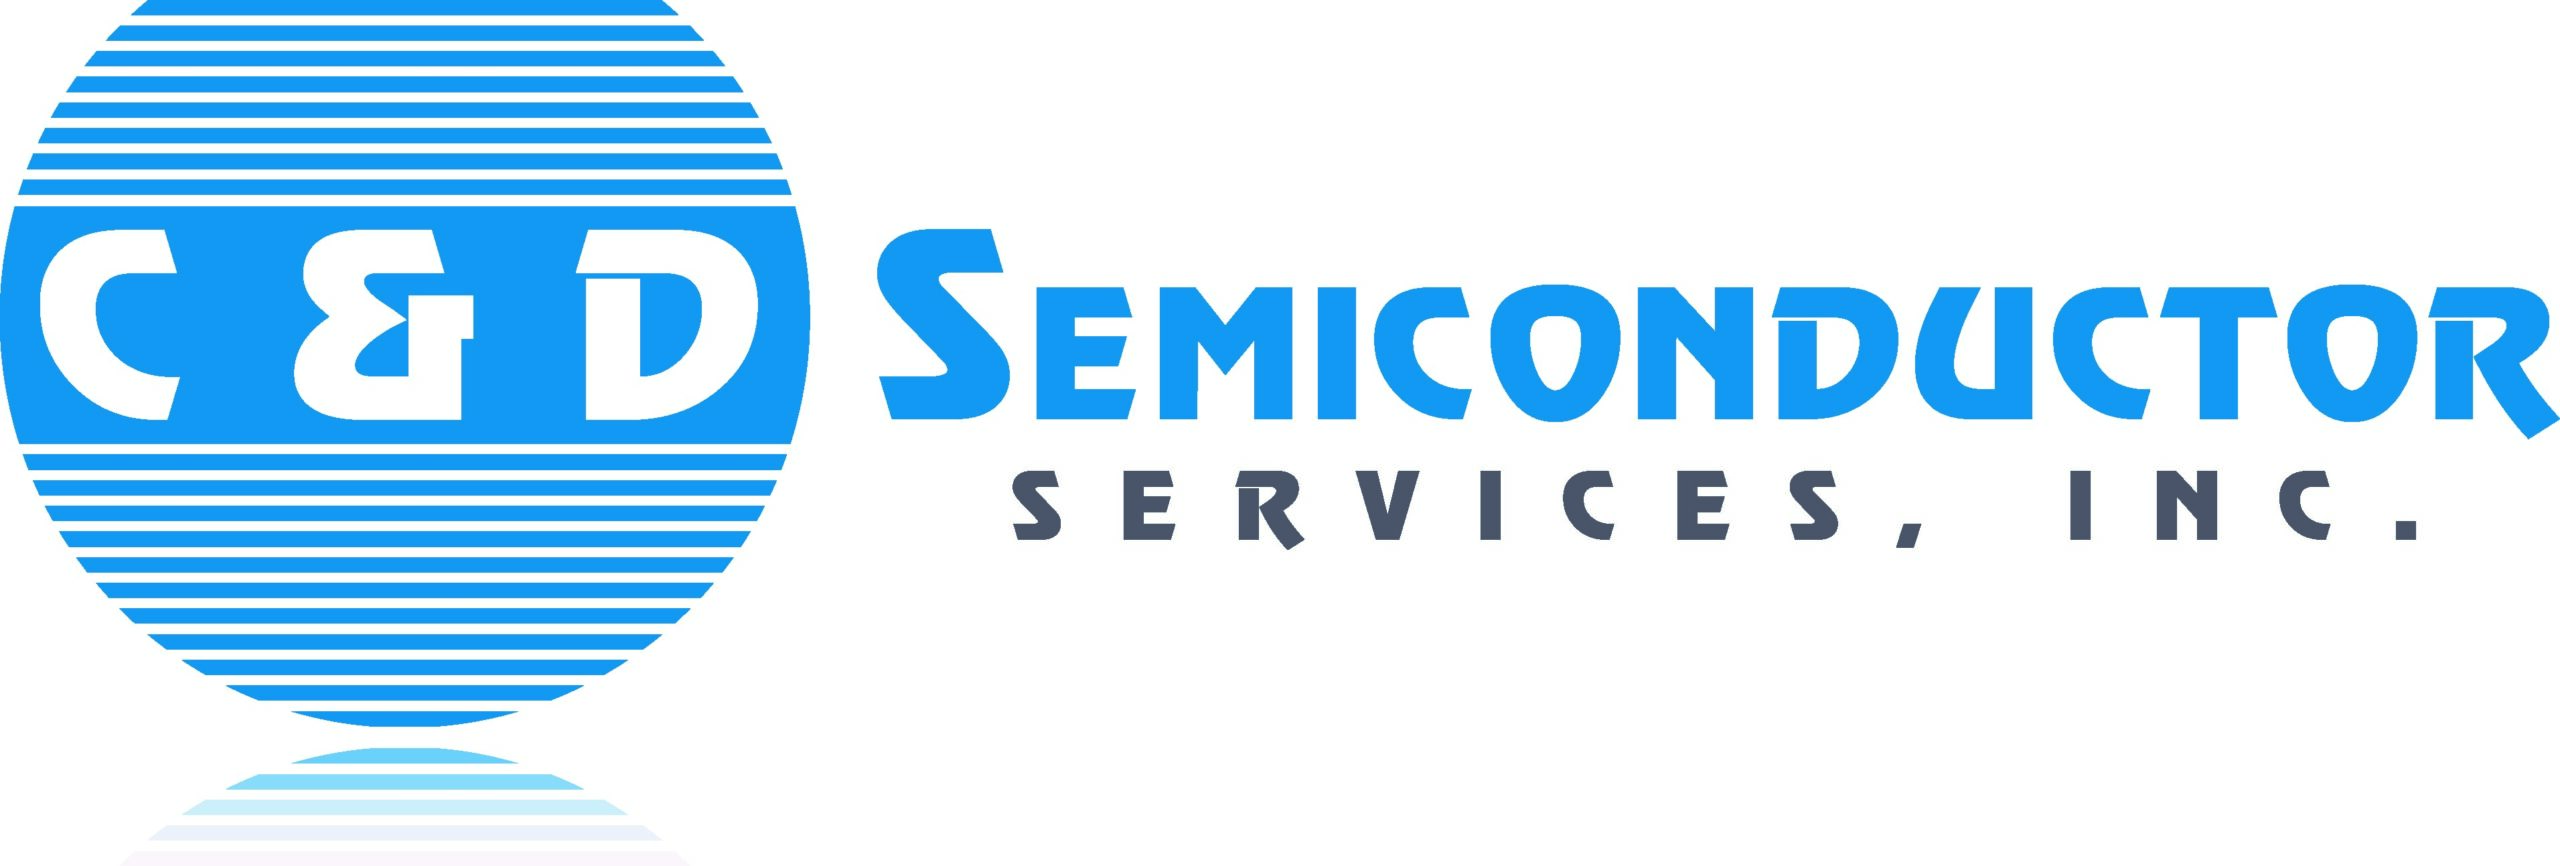 Logo for C&D Semiconductor